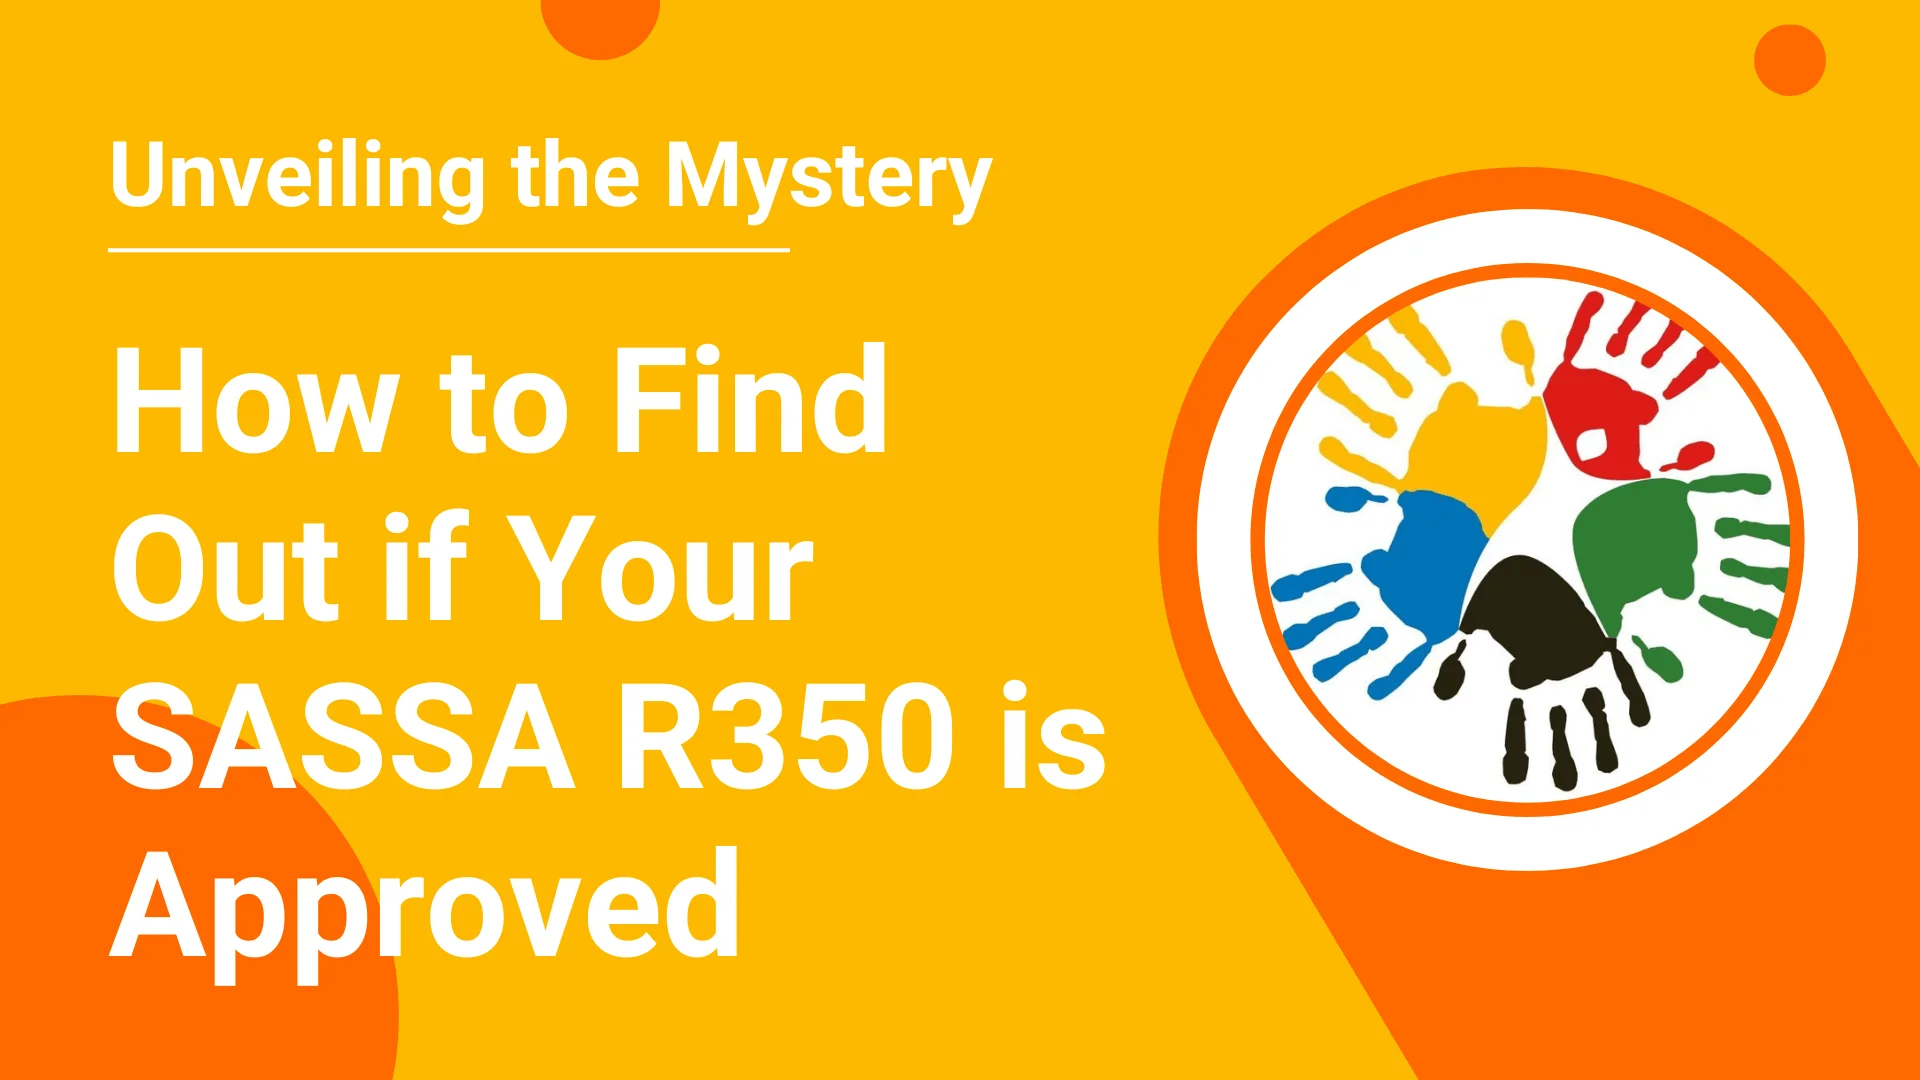 How to Find Out if Your SASSA R350 is Approved